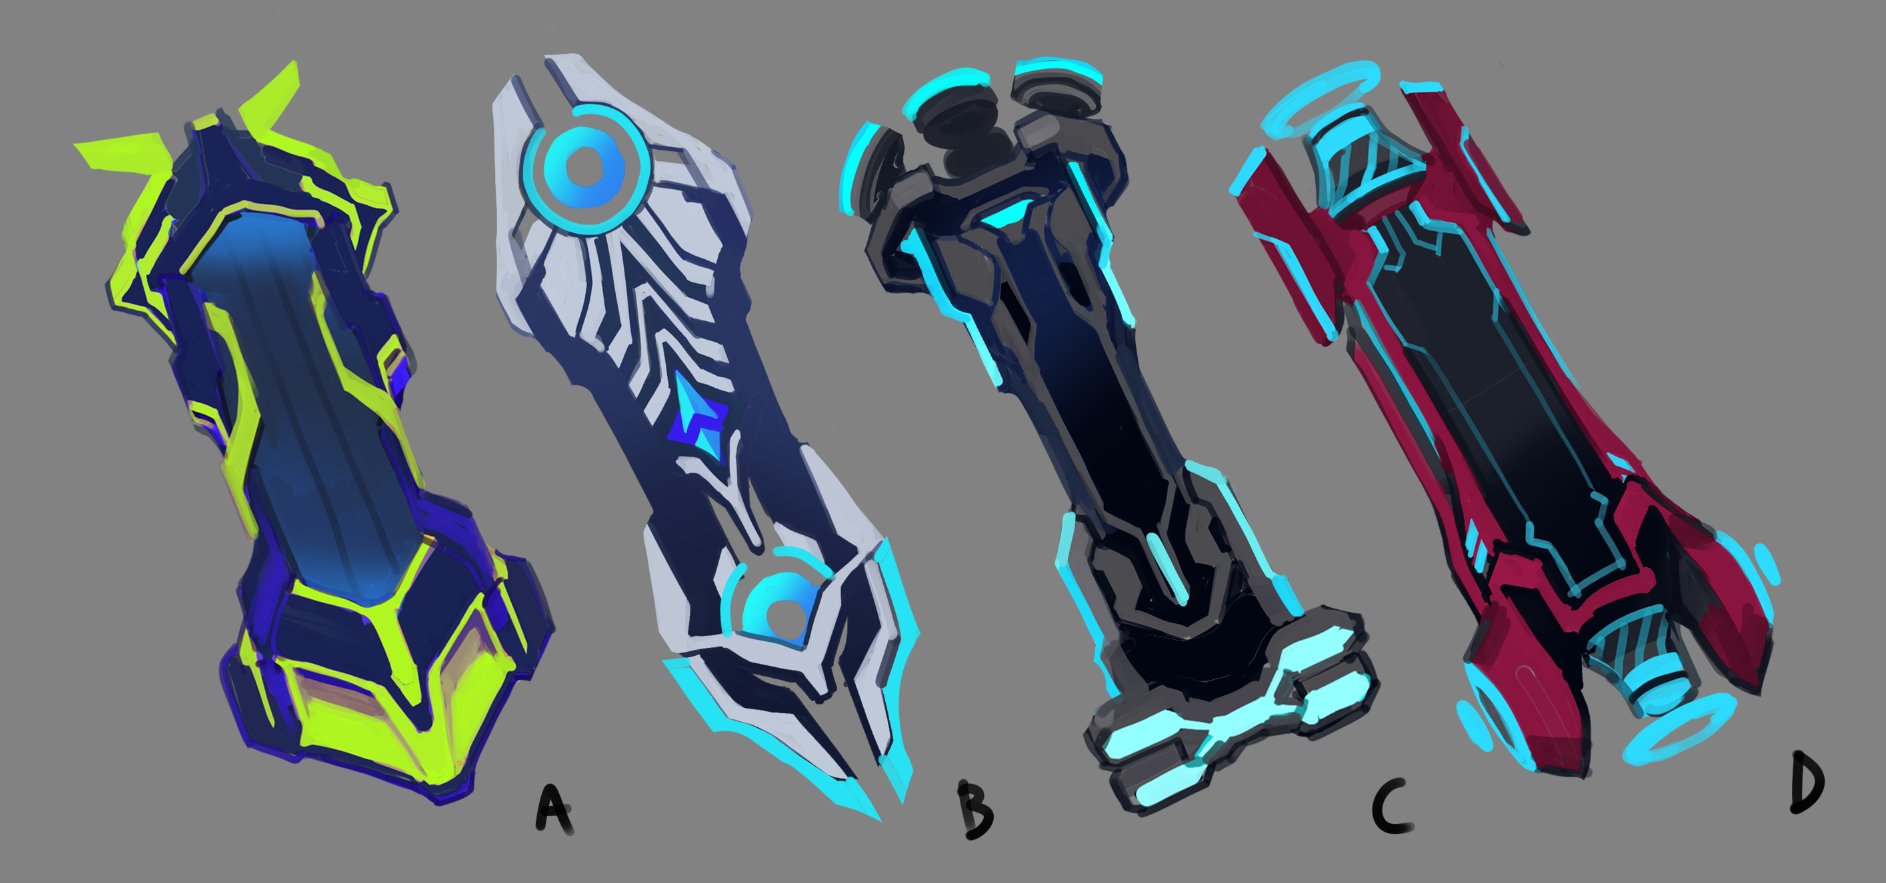 entrada Masaccio conformidad EVAVERSE Twitterren: "Morning NFT fam! ☀️ Here's some concept art for our  upcoming hoverboard races! 🛹 Which one do you want most? 👇  #readyplayerone #metaverse #nftgame #playtoearn #NFTCommunity  https://t.co/QYUDlvOkmu" / Twitter